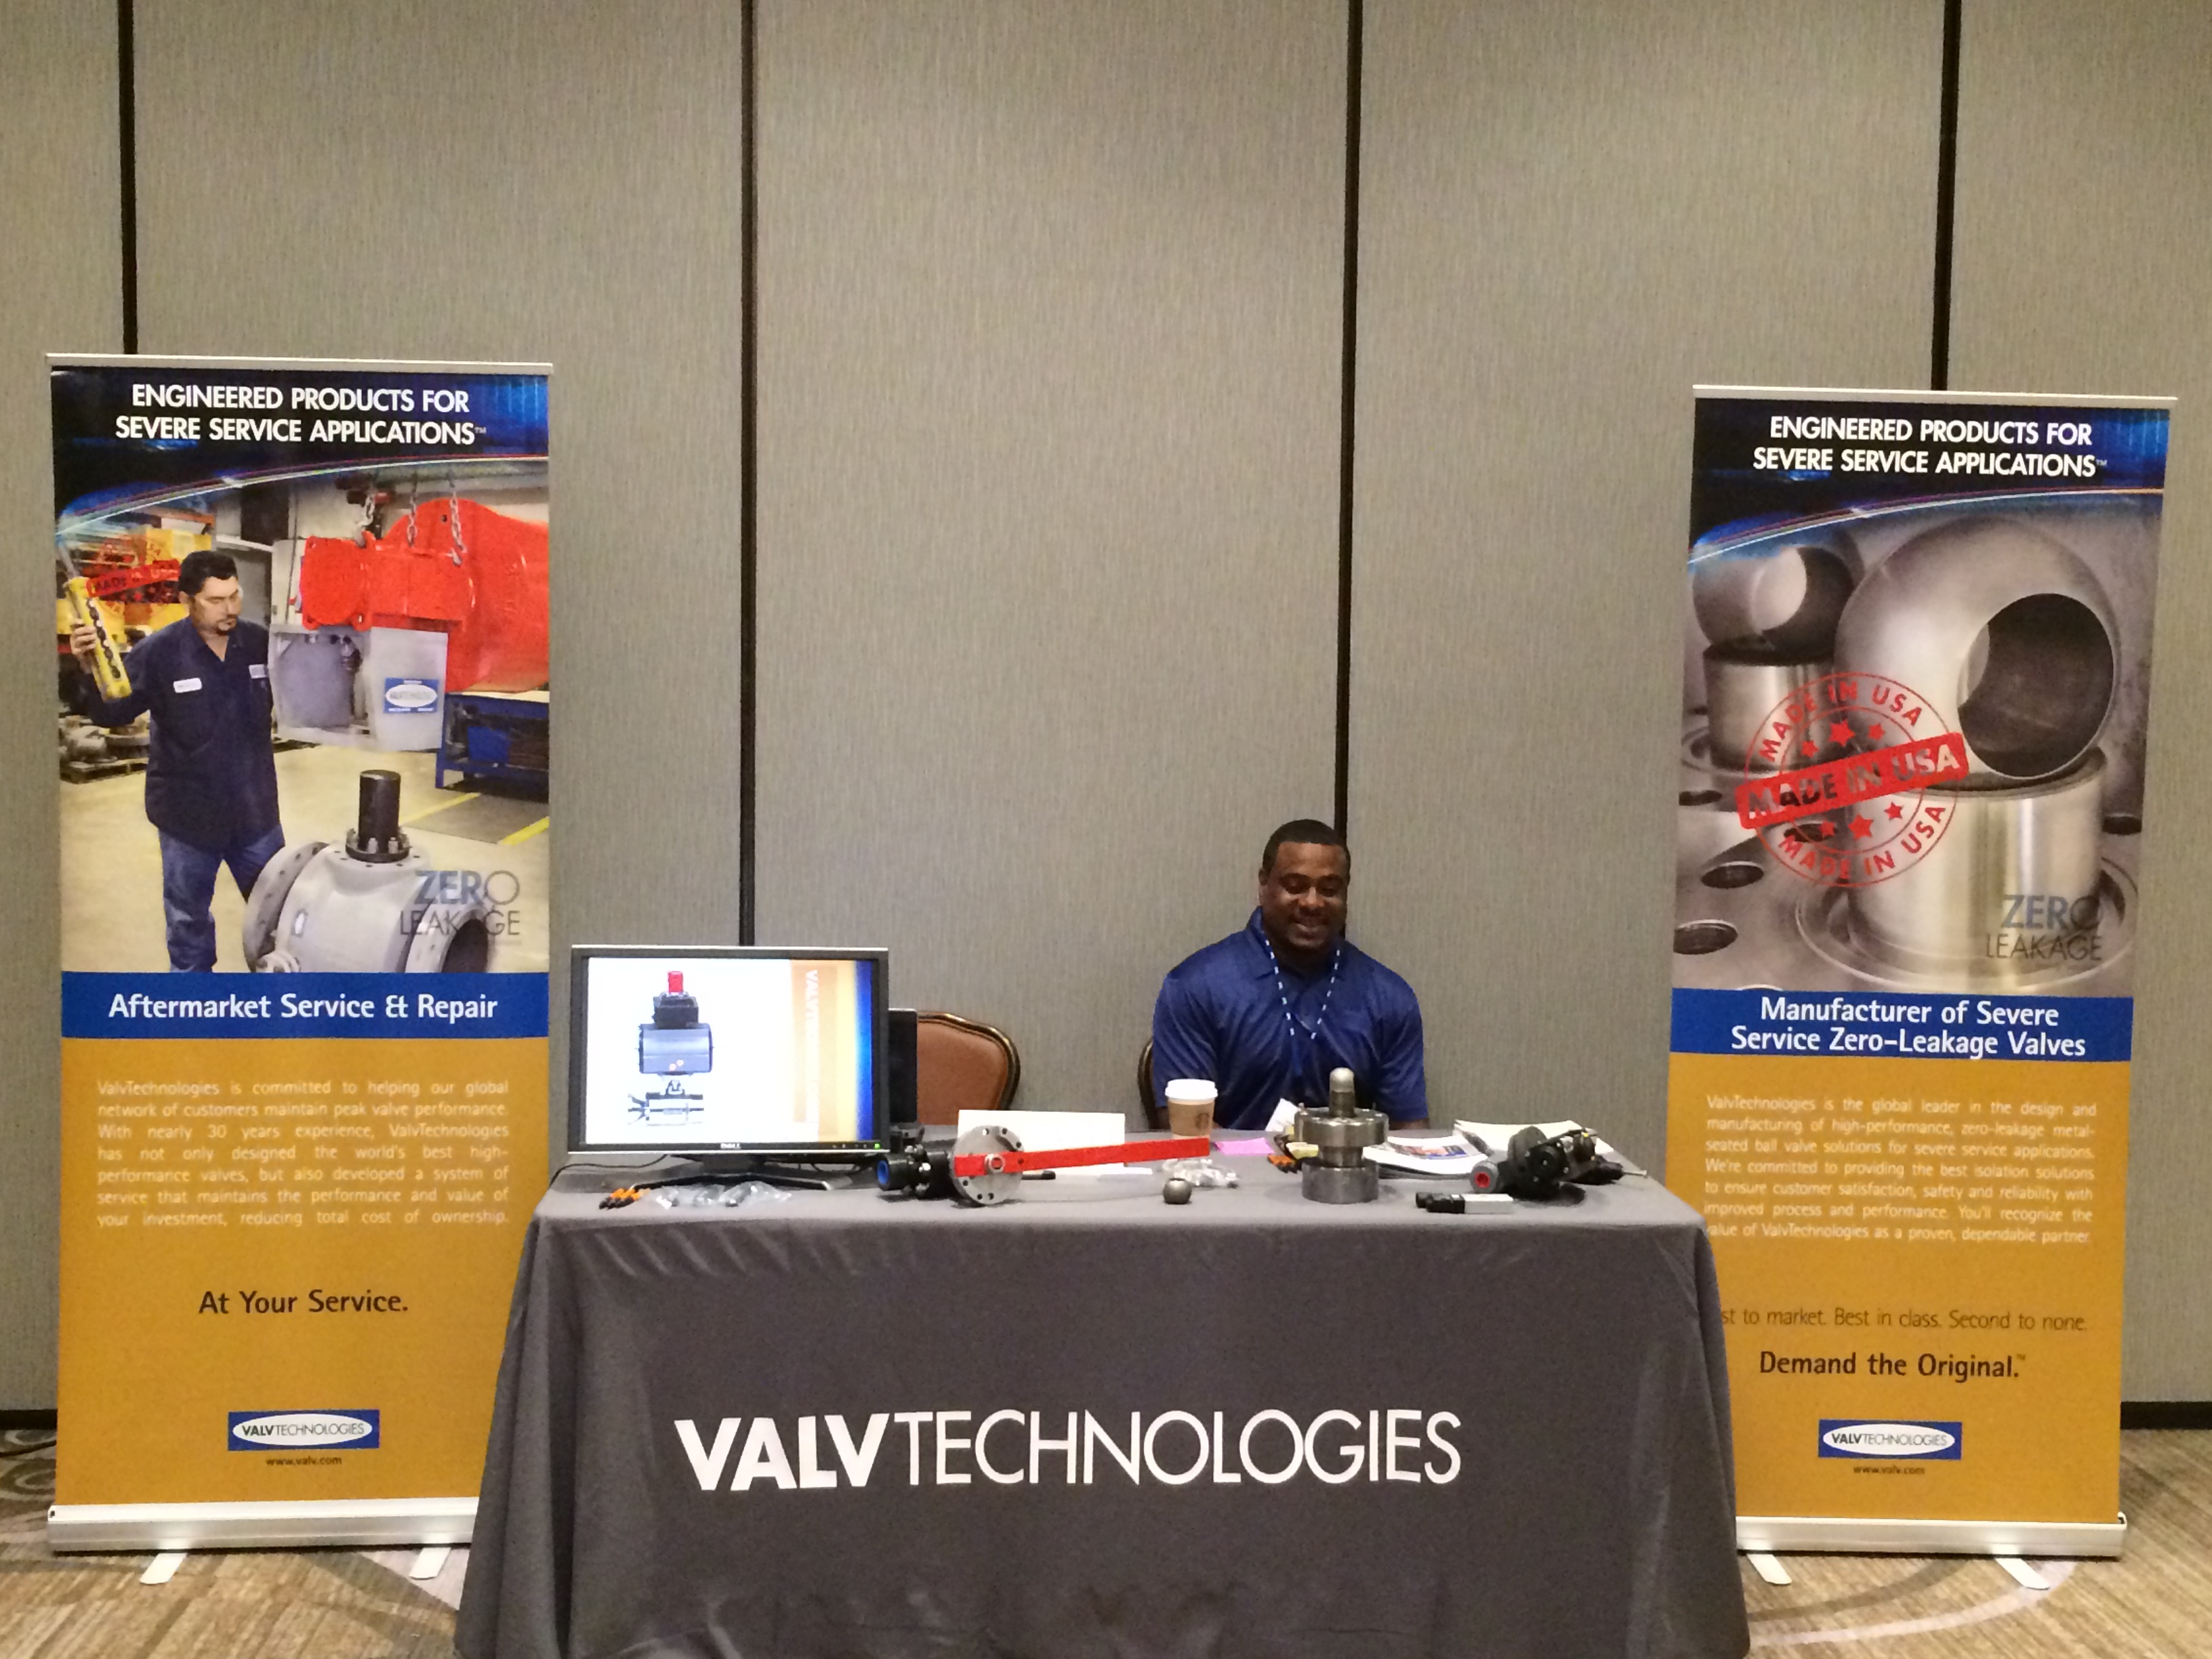 Service Engineer, Andre Nichols and North American Service Manager, Donald Polasek represent ValvTechnologies at the VMA Valve Basics Training Event